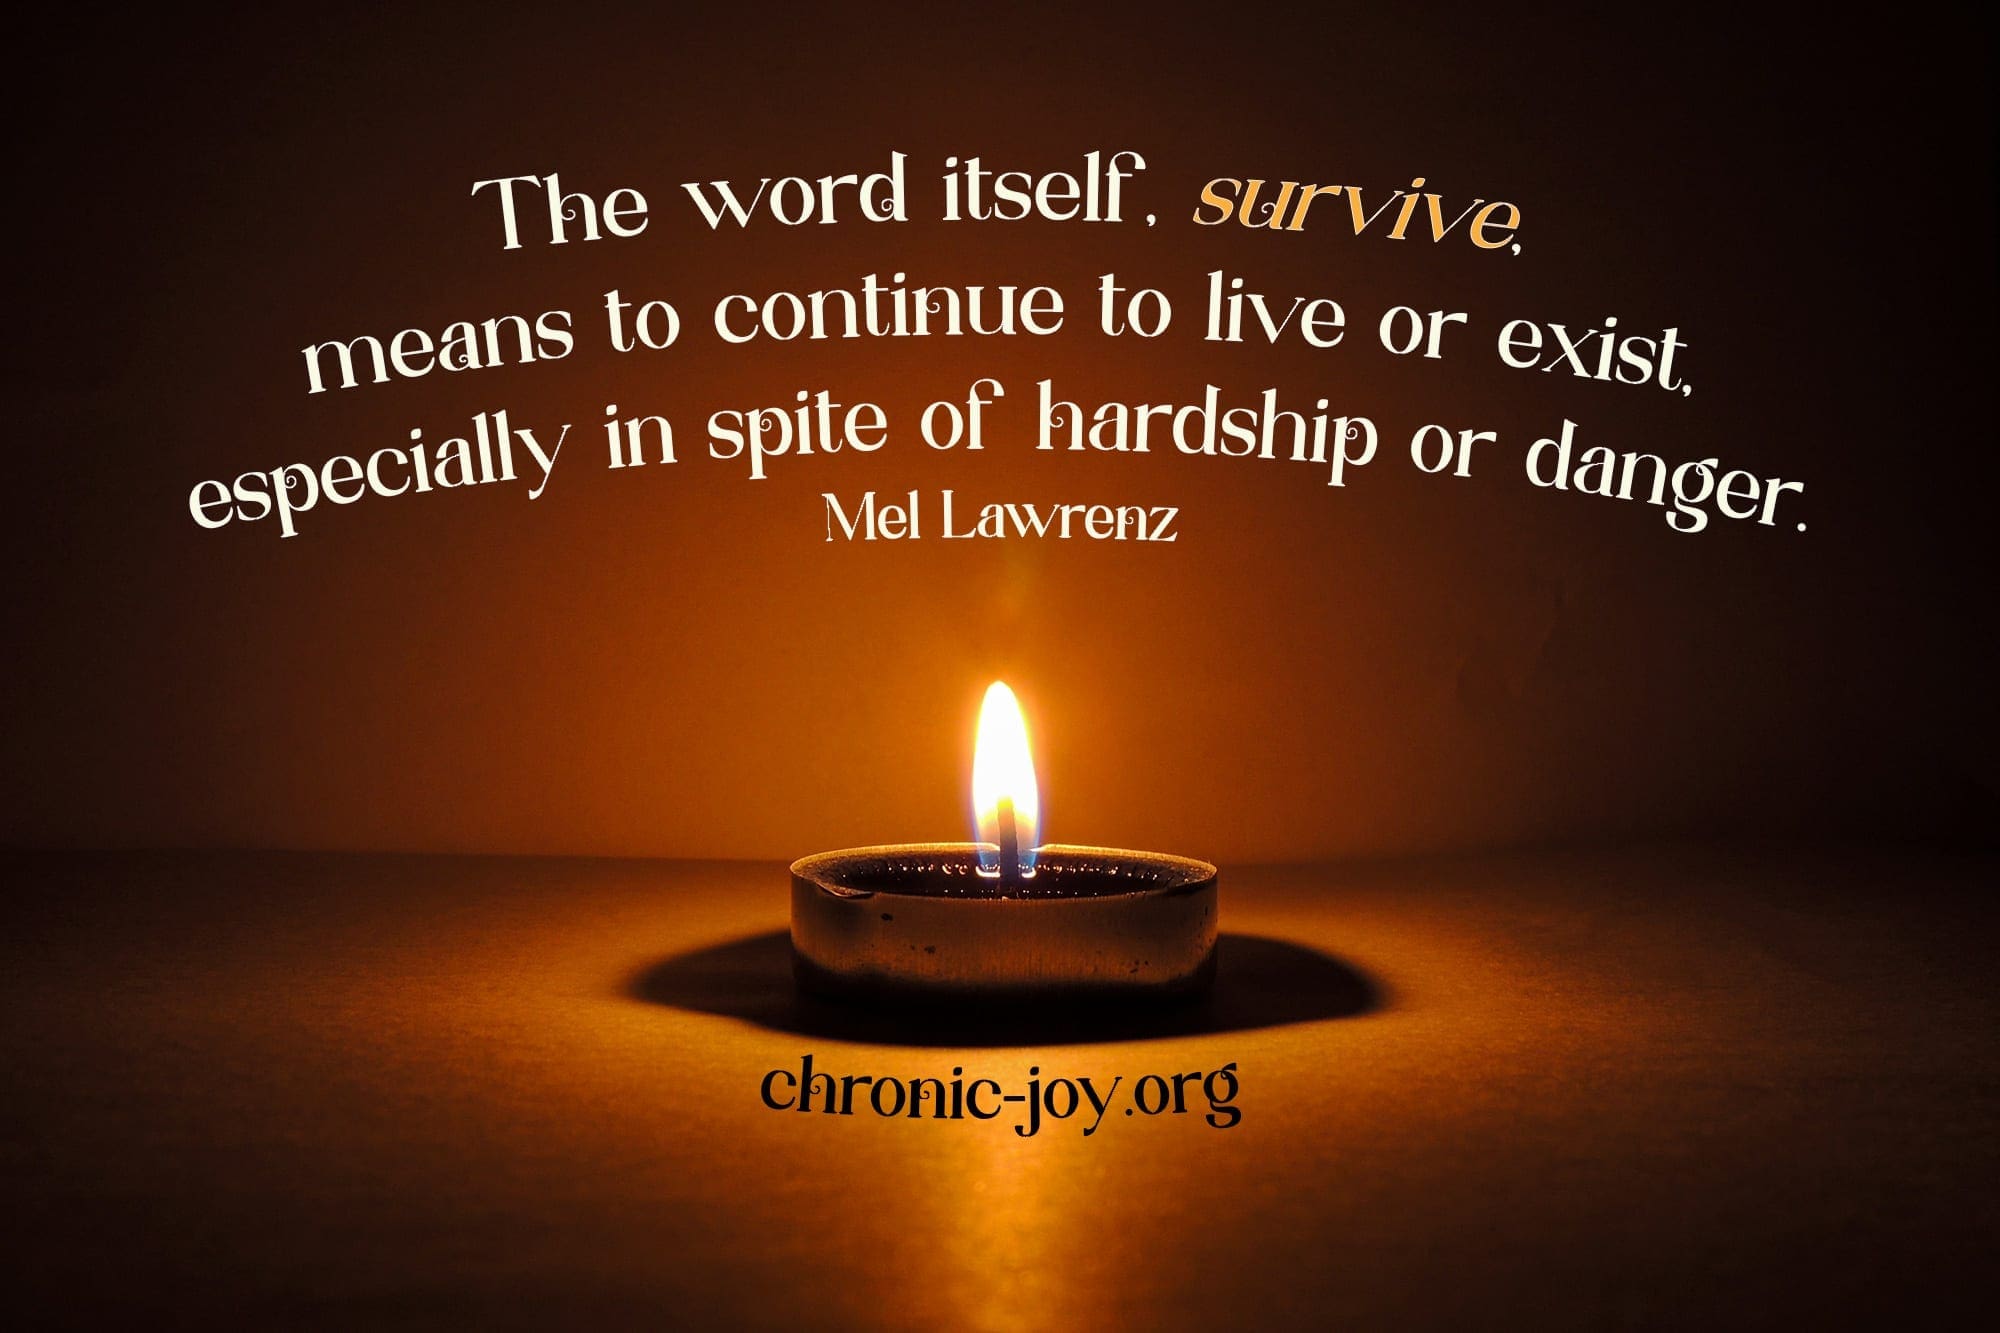 "The word itself, survive, means to continue to live or exist, especially in spite of hardship or danger." Mel Lawrenz